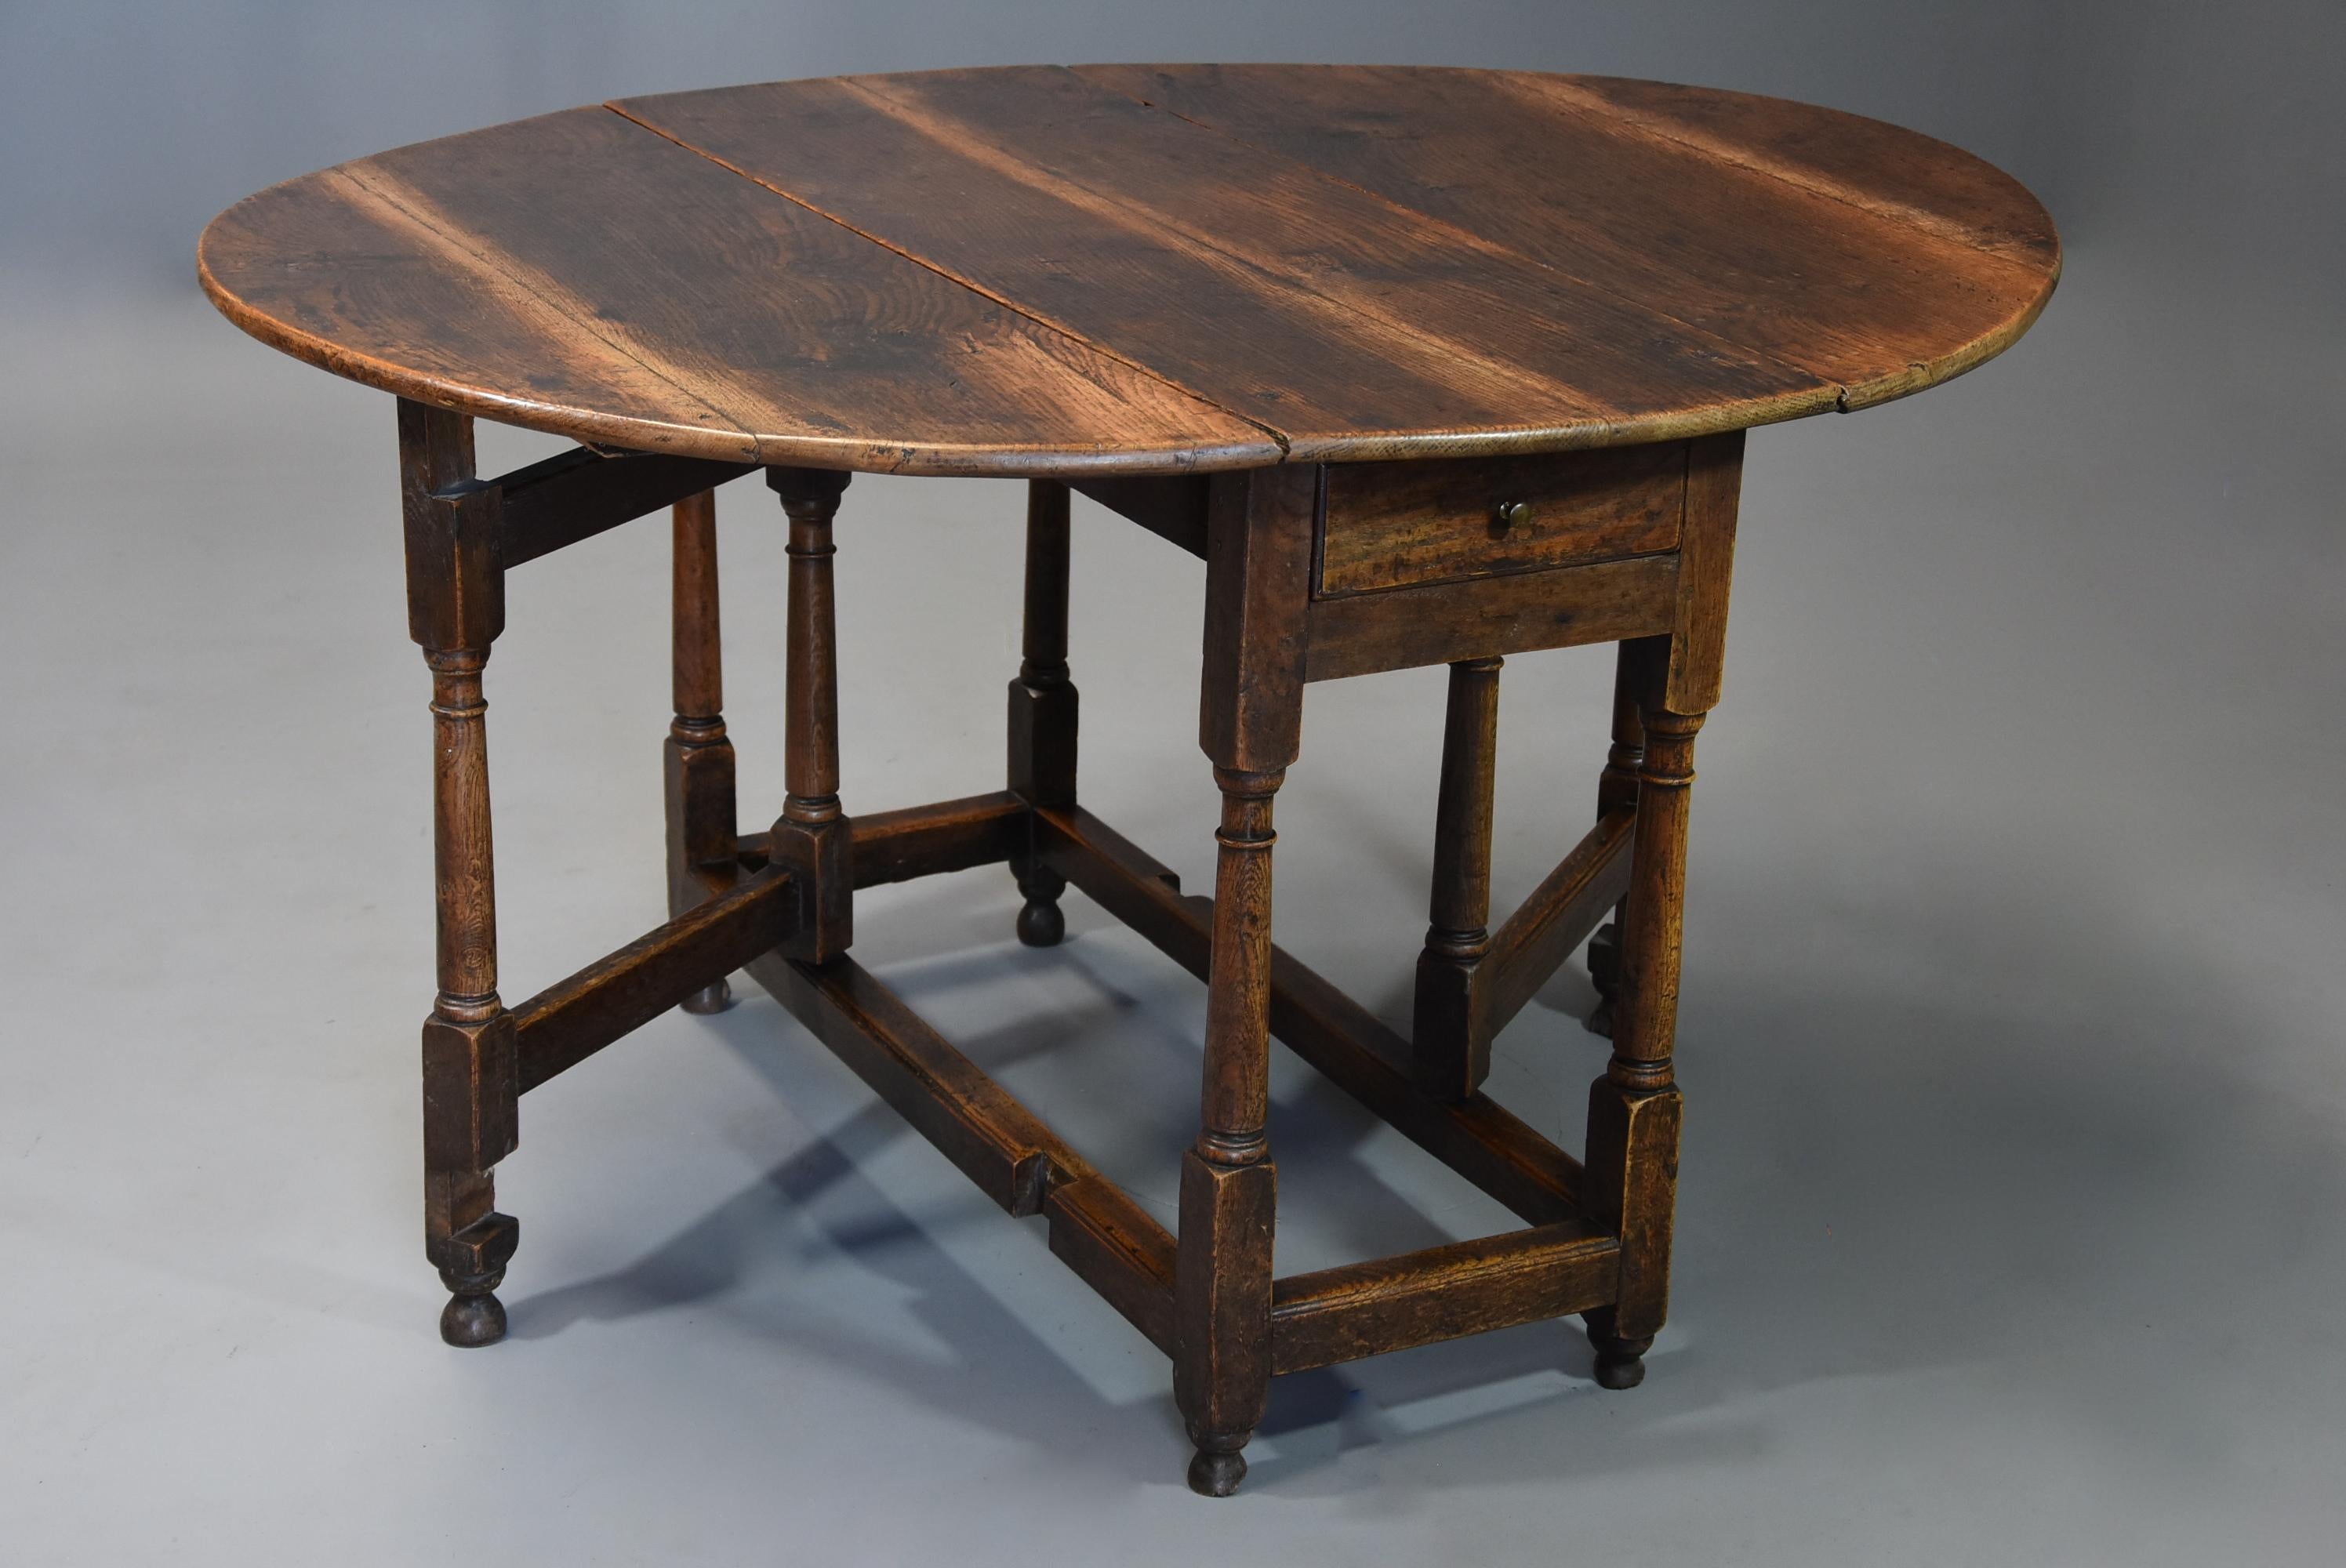 English Early 18th Century Oak Gateleg Table with Superb Original Patina In Good Condition For Sale In Suffolk, GB